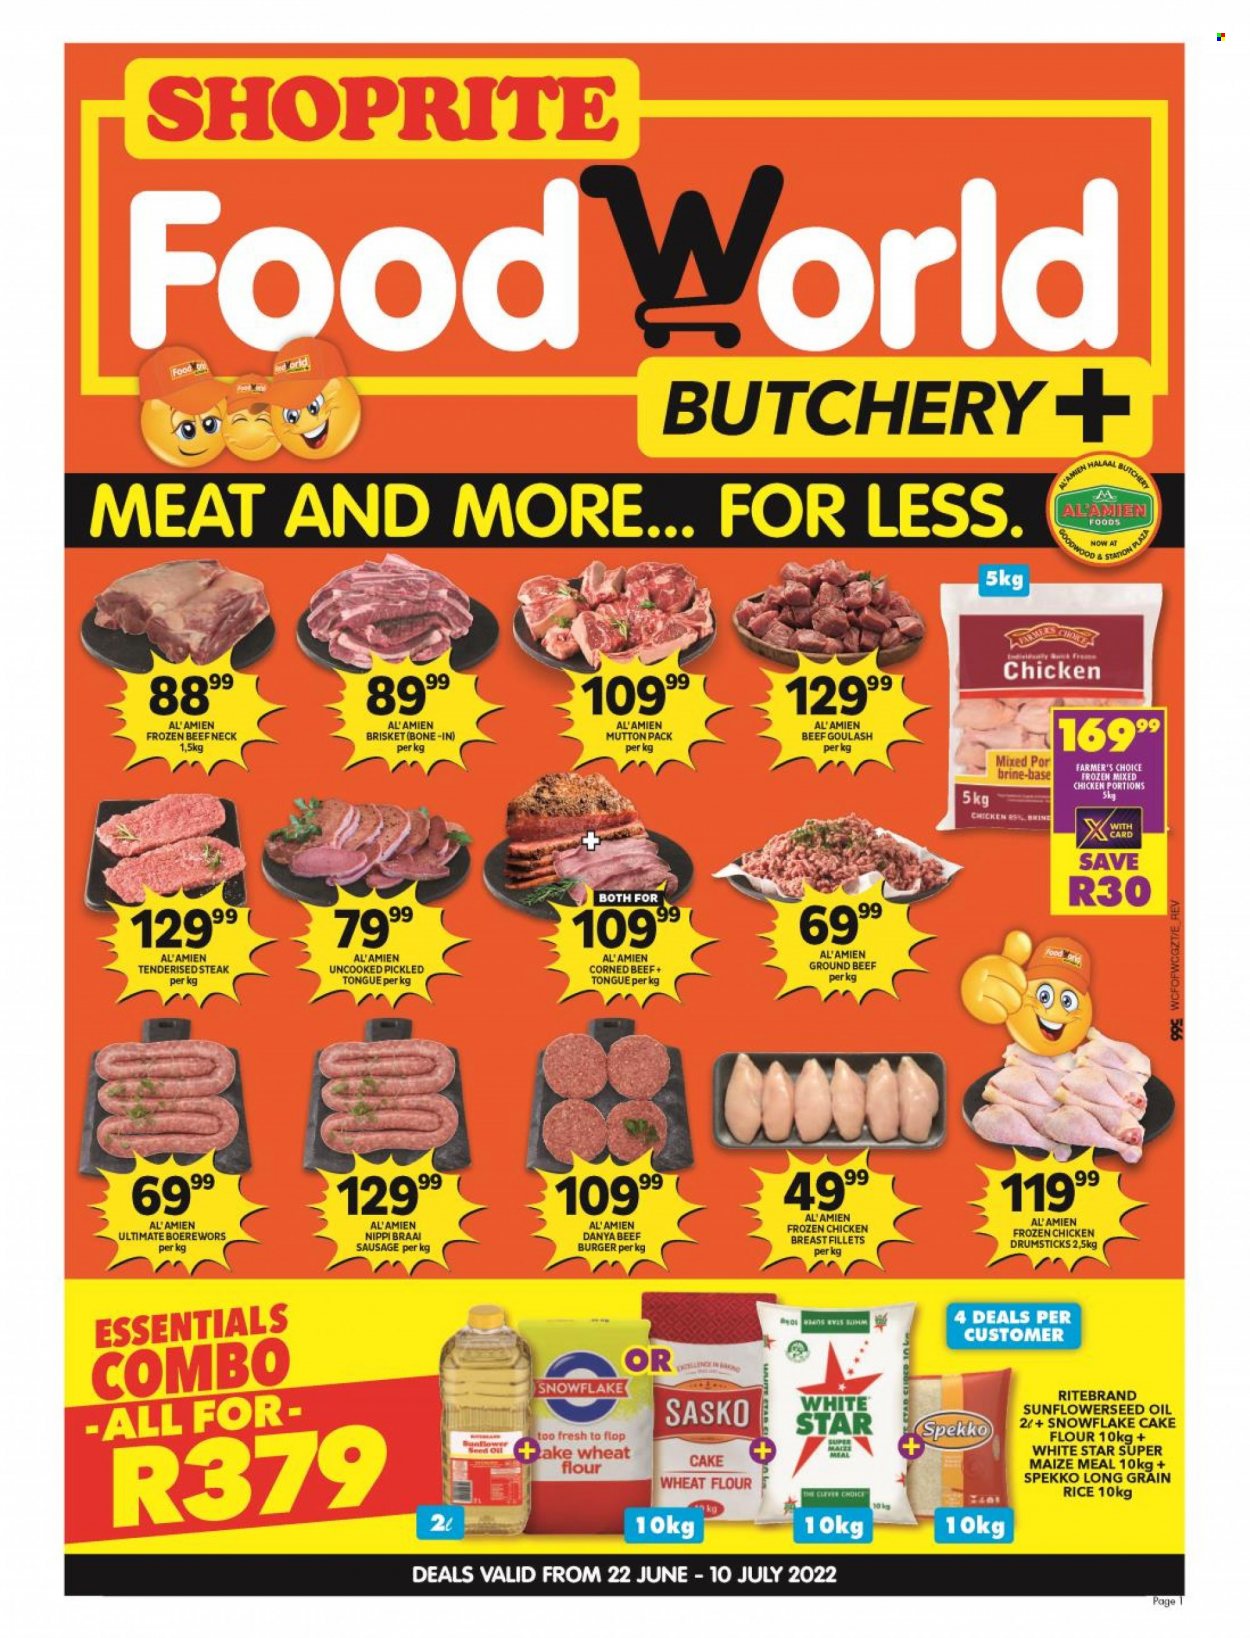 Shoprite catalogue  - 22/06/2022 - 10/07/2022 - Sales products - beans, hamburger, beef burger, sausage, corned beef, flour, wheat flour, maize meal, cake flour, White Star, rice, Spekko, long grain rice, oil, chicken breasts, chicken drumsticks, chicken meat, beef meat, ground beef, steak, mutton meat, essentials, braai wors. Page 1.